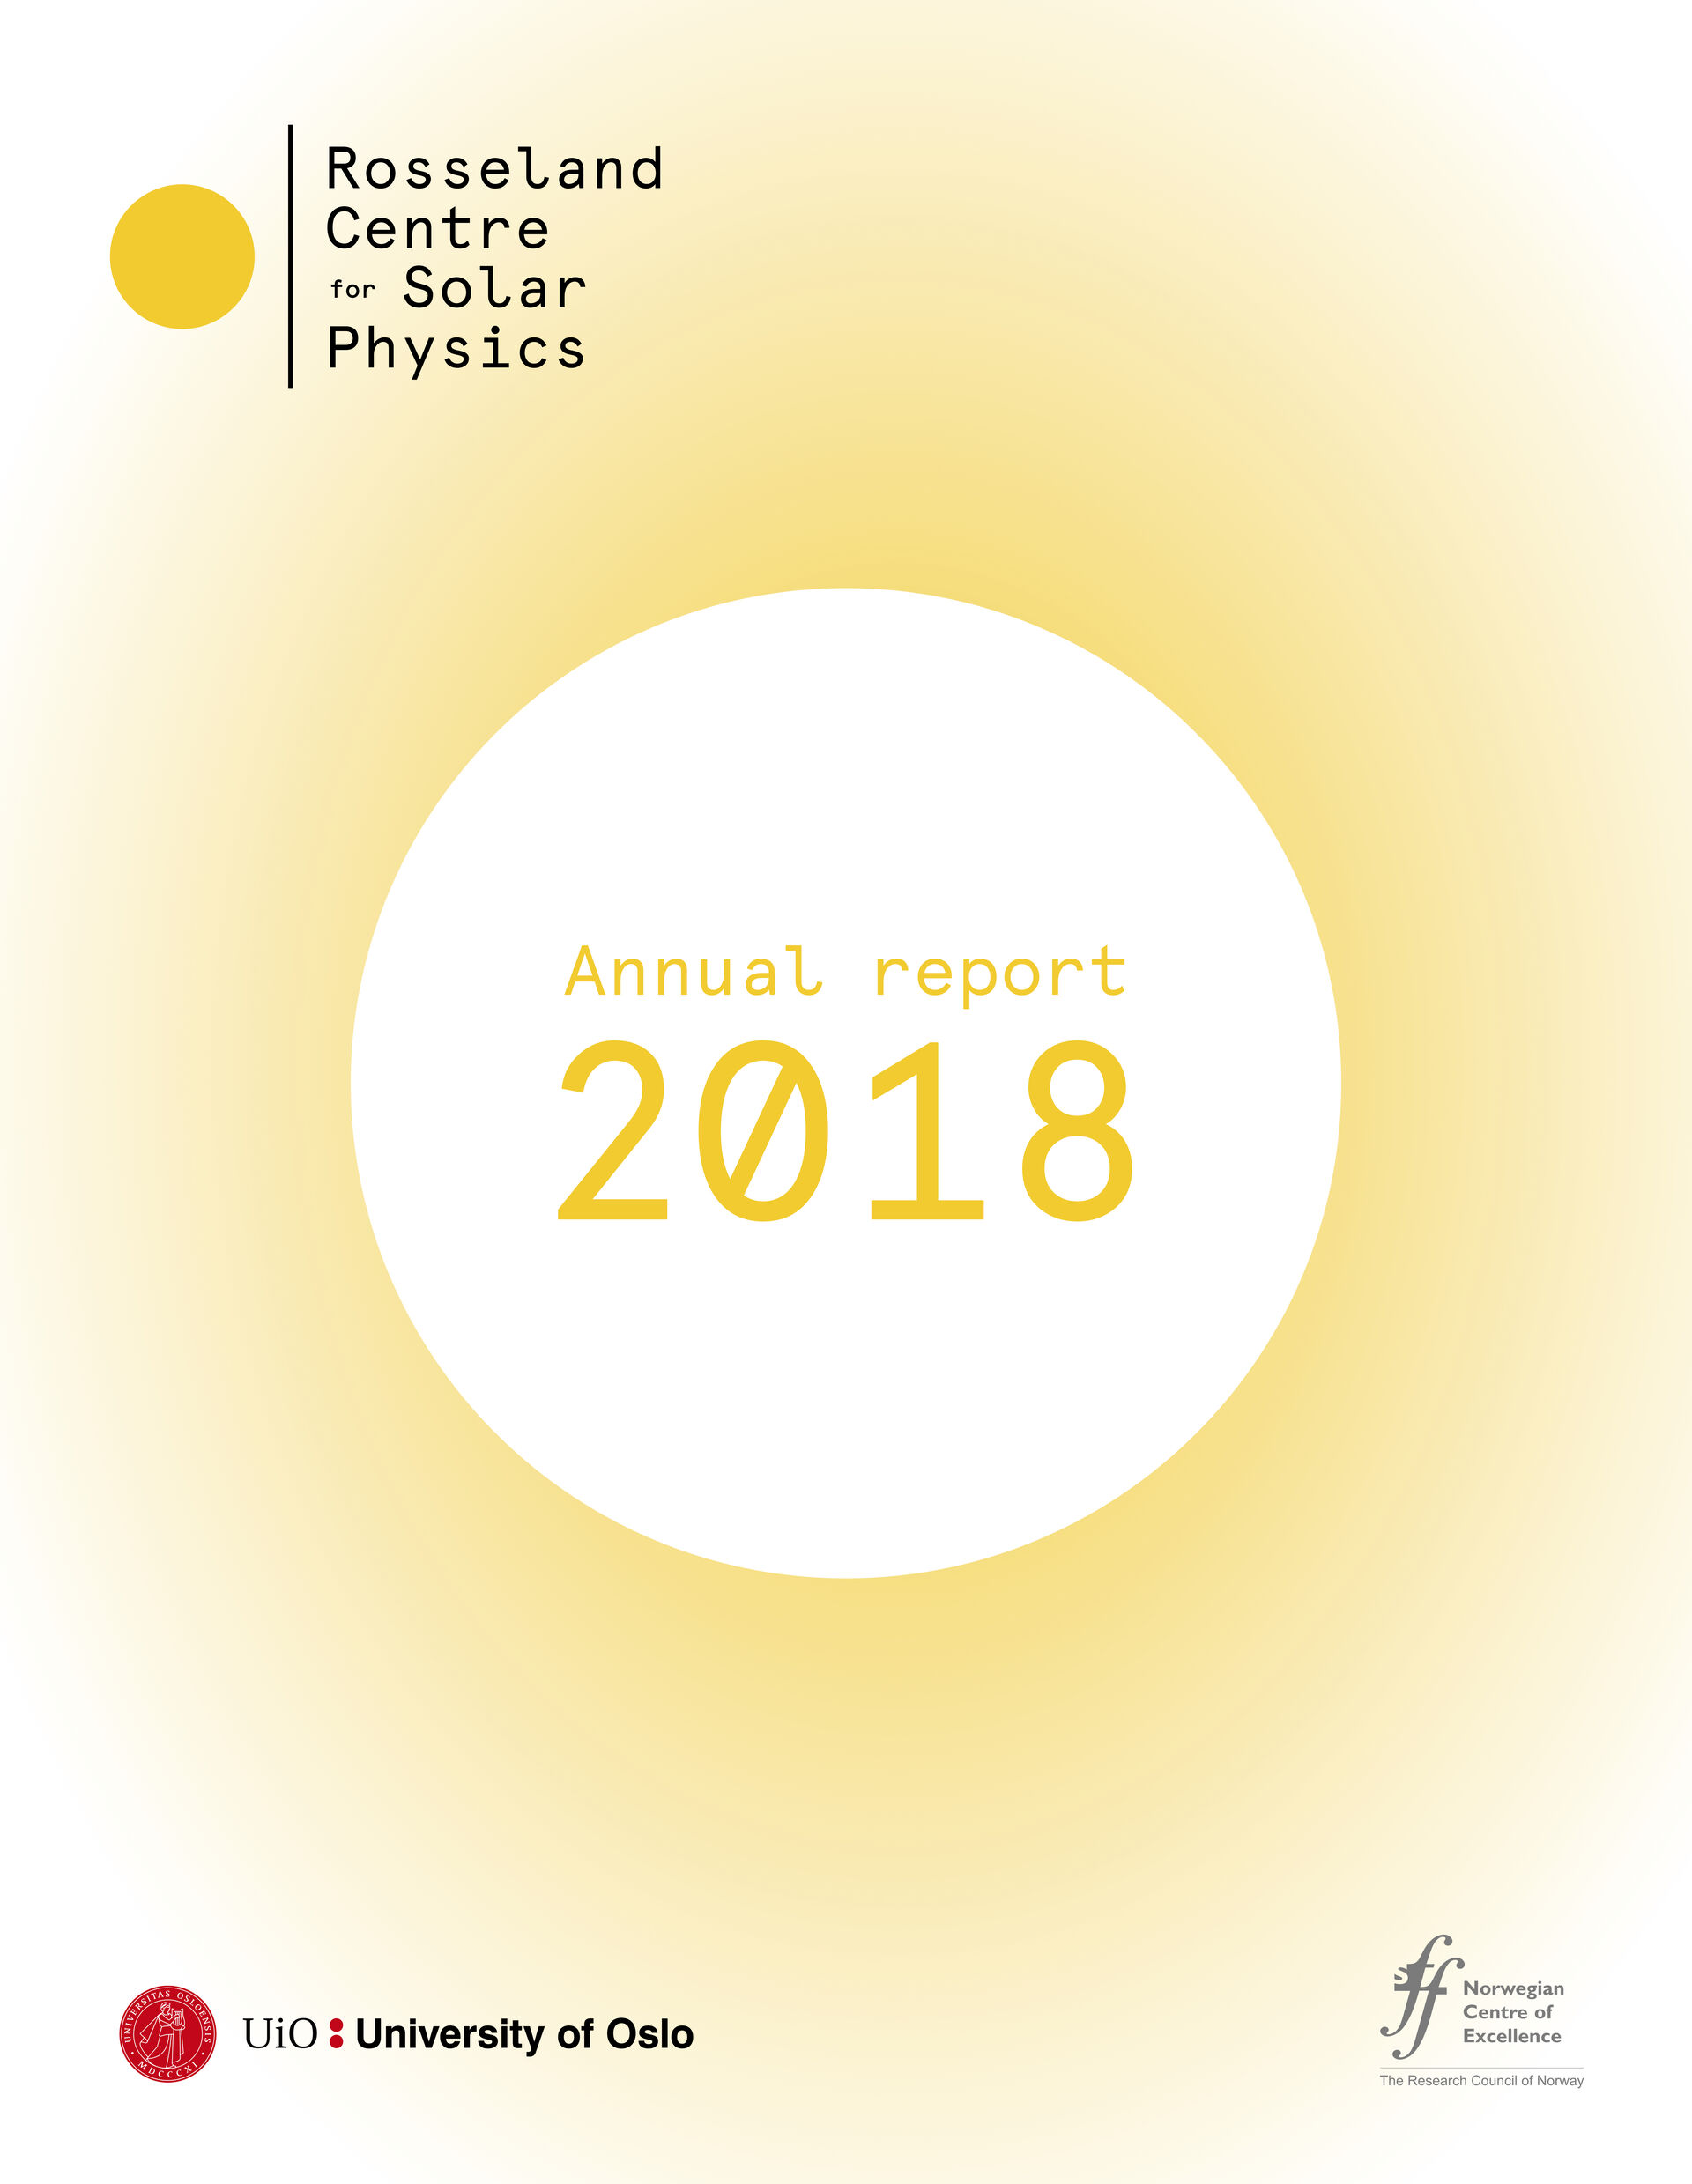 Cover page of the RoCS' Annual Report 2018